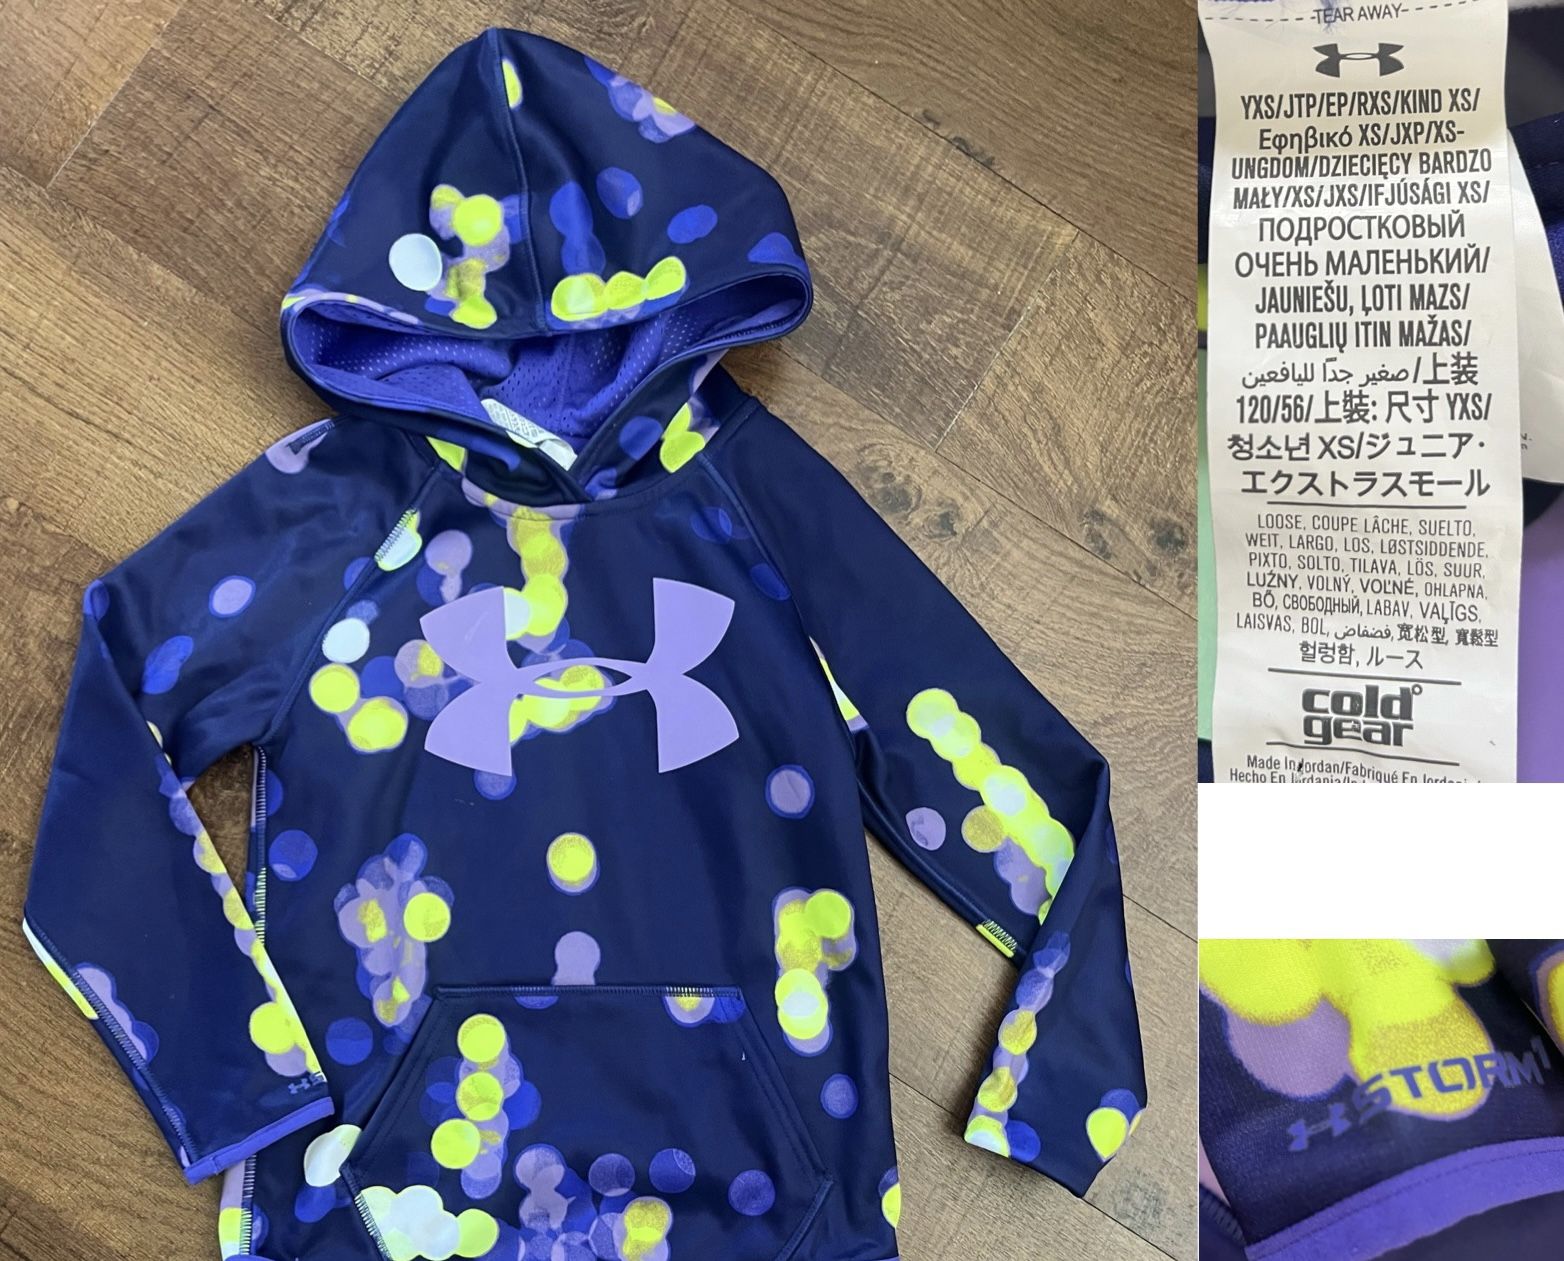 Under Armour Storm Girl Youth Hoodie XS 